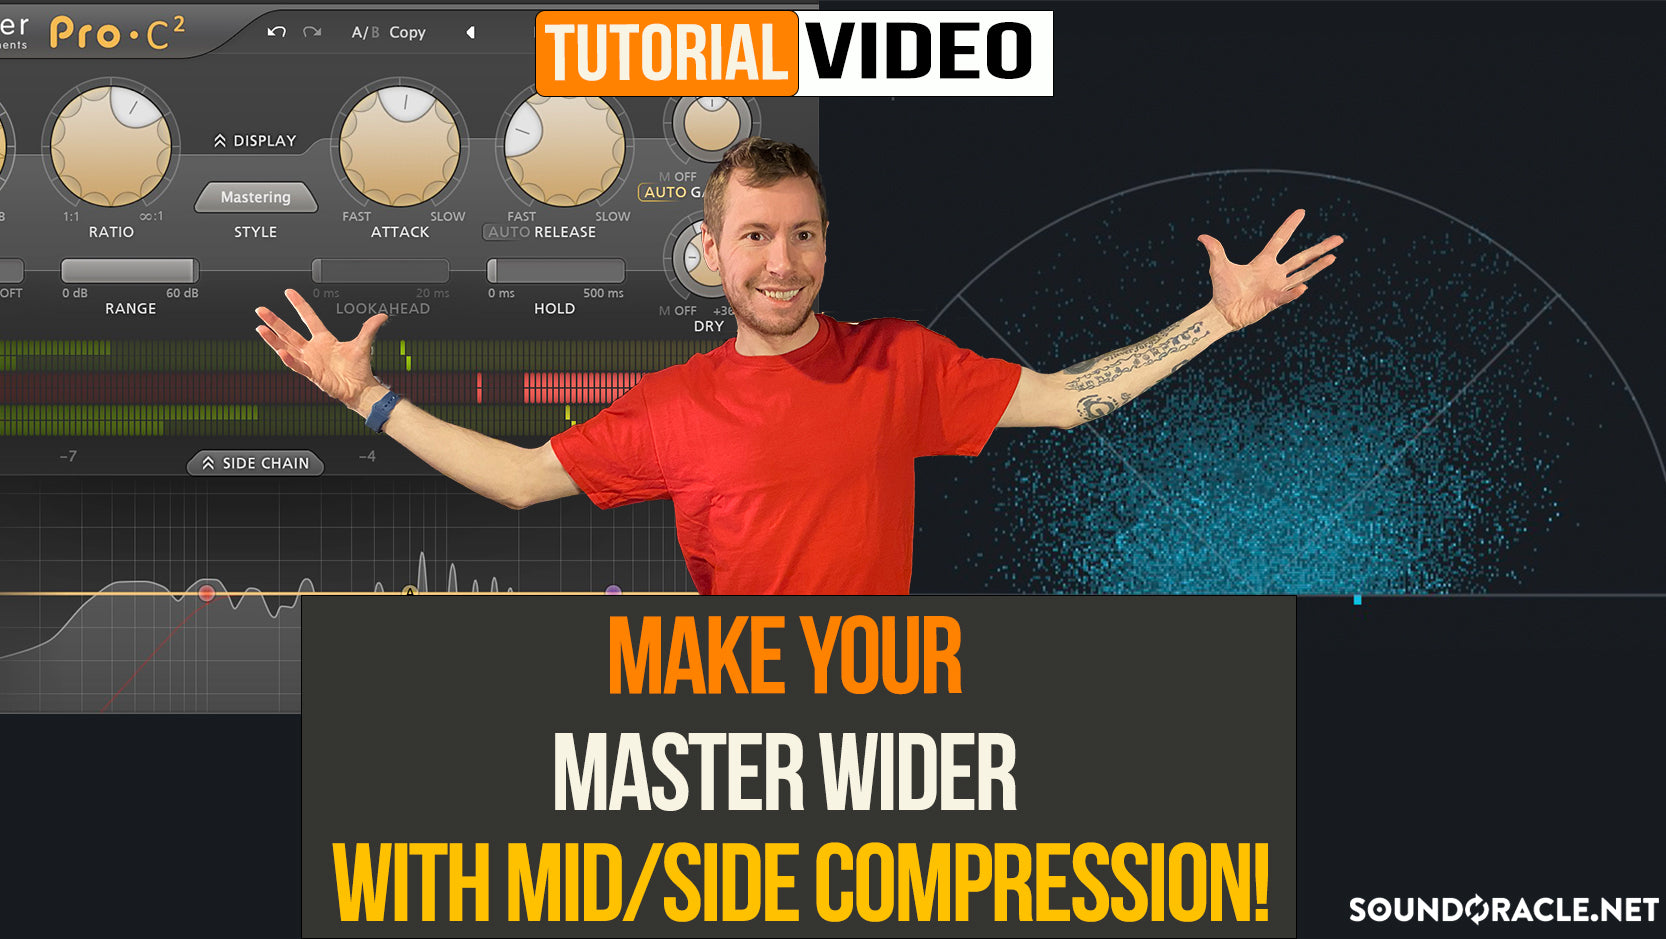 Make Your Master Wider With Mid/Side Compression!